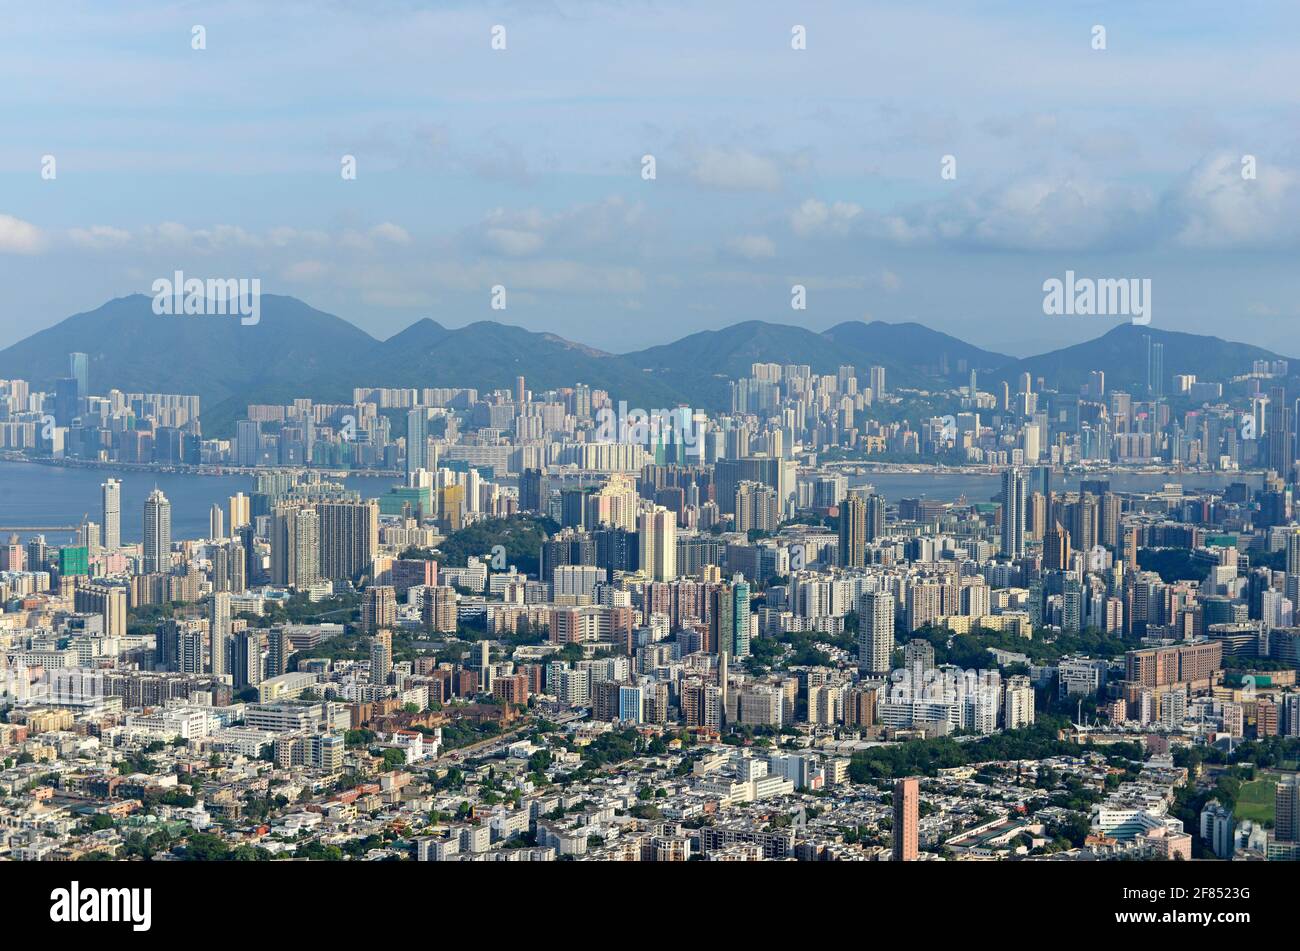 View over the Kowloon peninsular in Hong Kong, China, taken from the Kowloon hills to the north Stock Photo